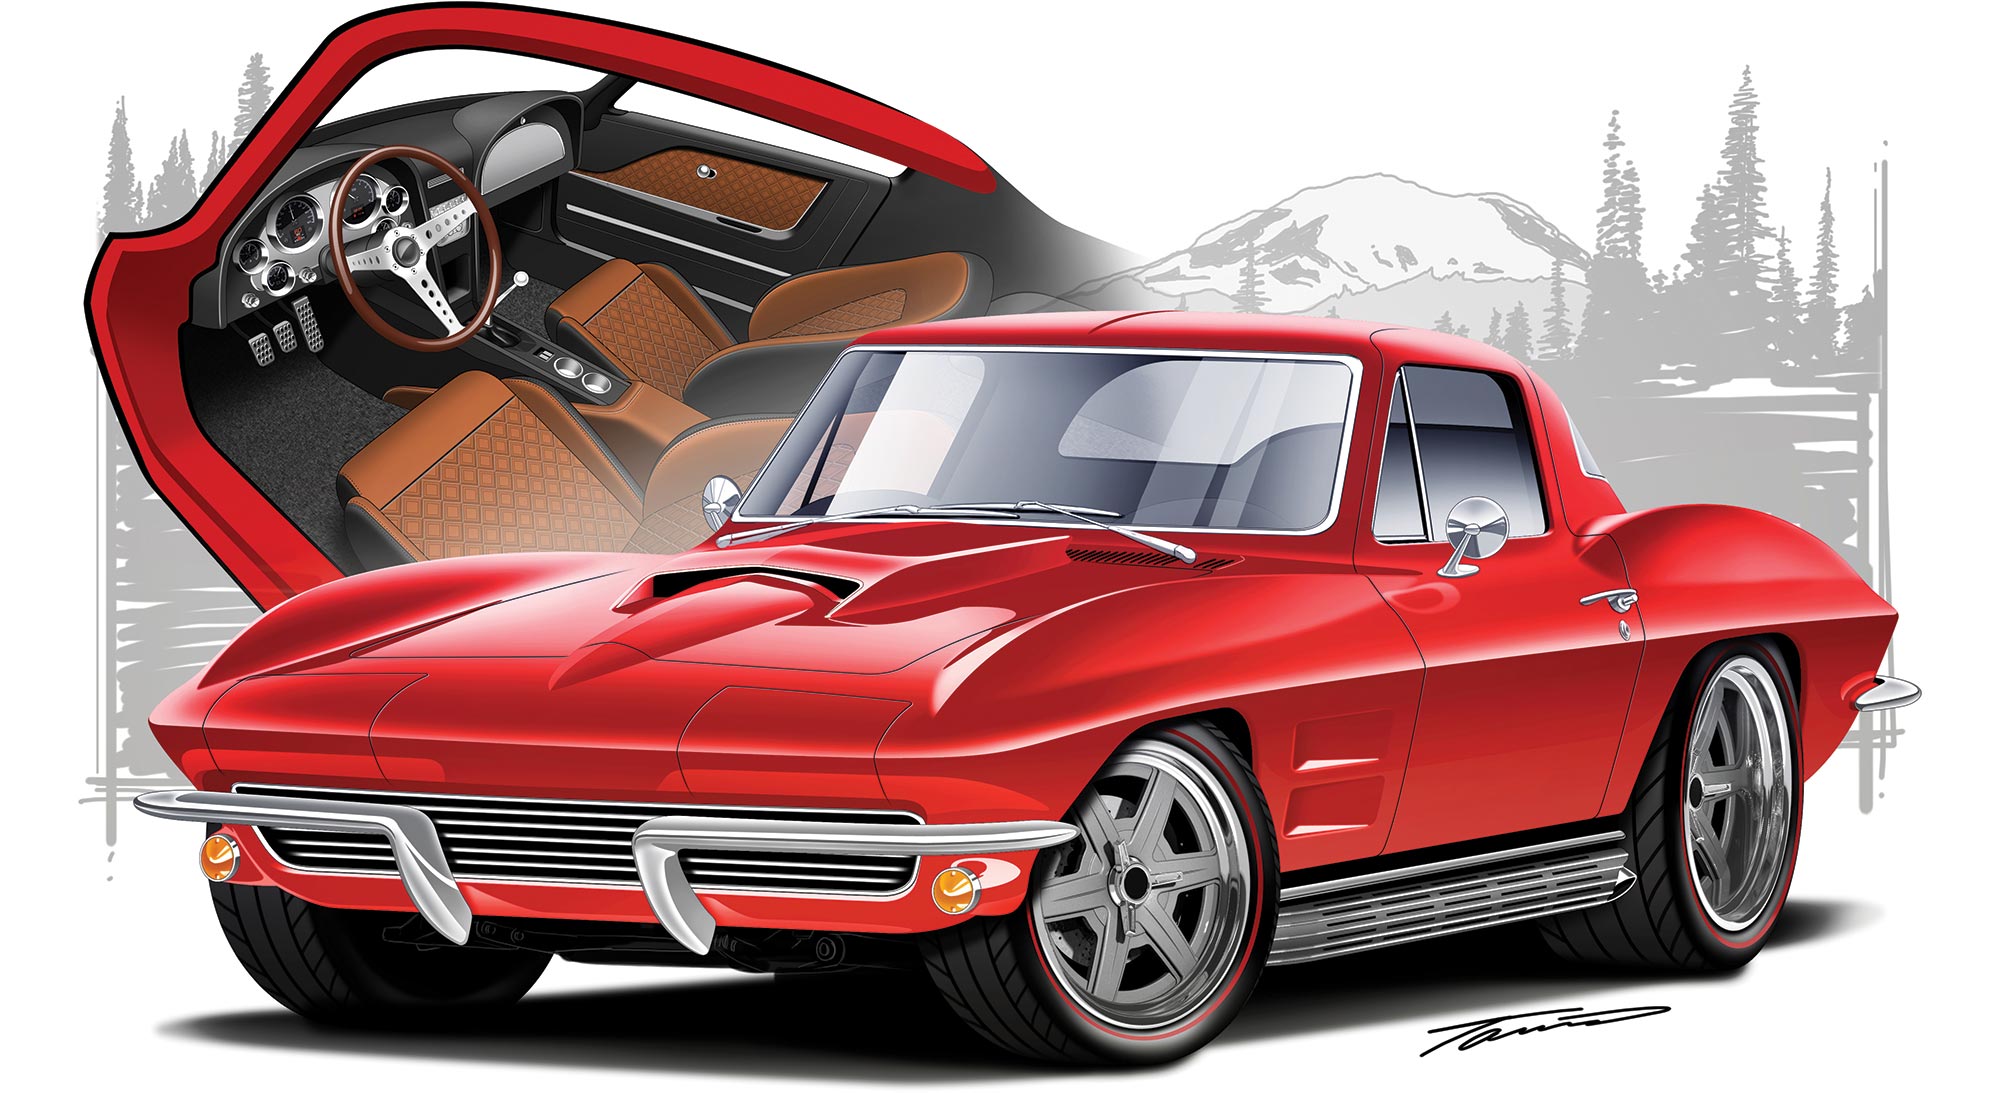 1964 corvette drawing showing exterior and interior